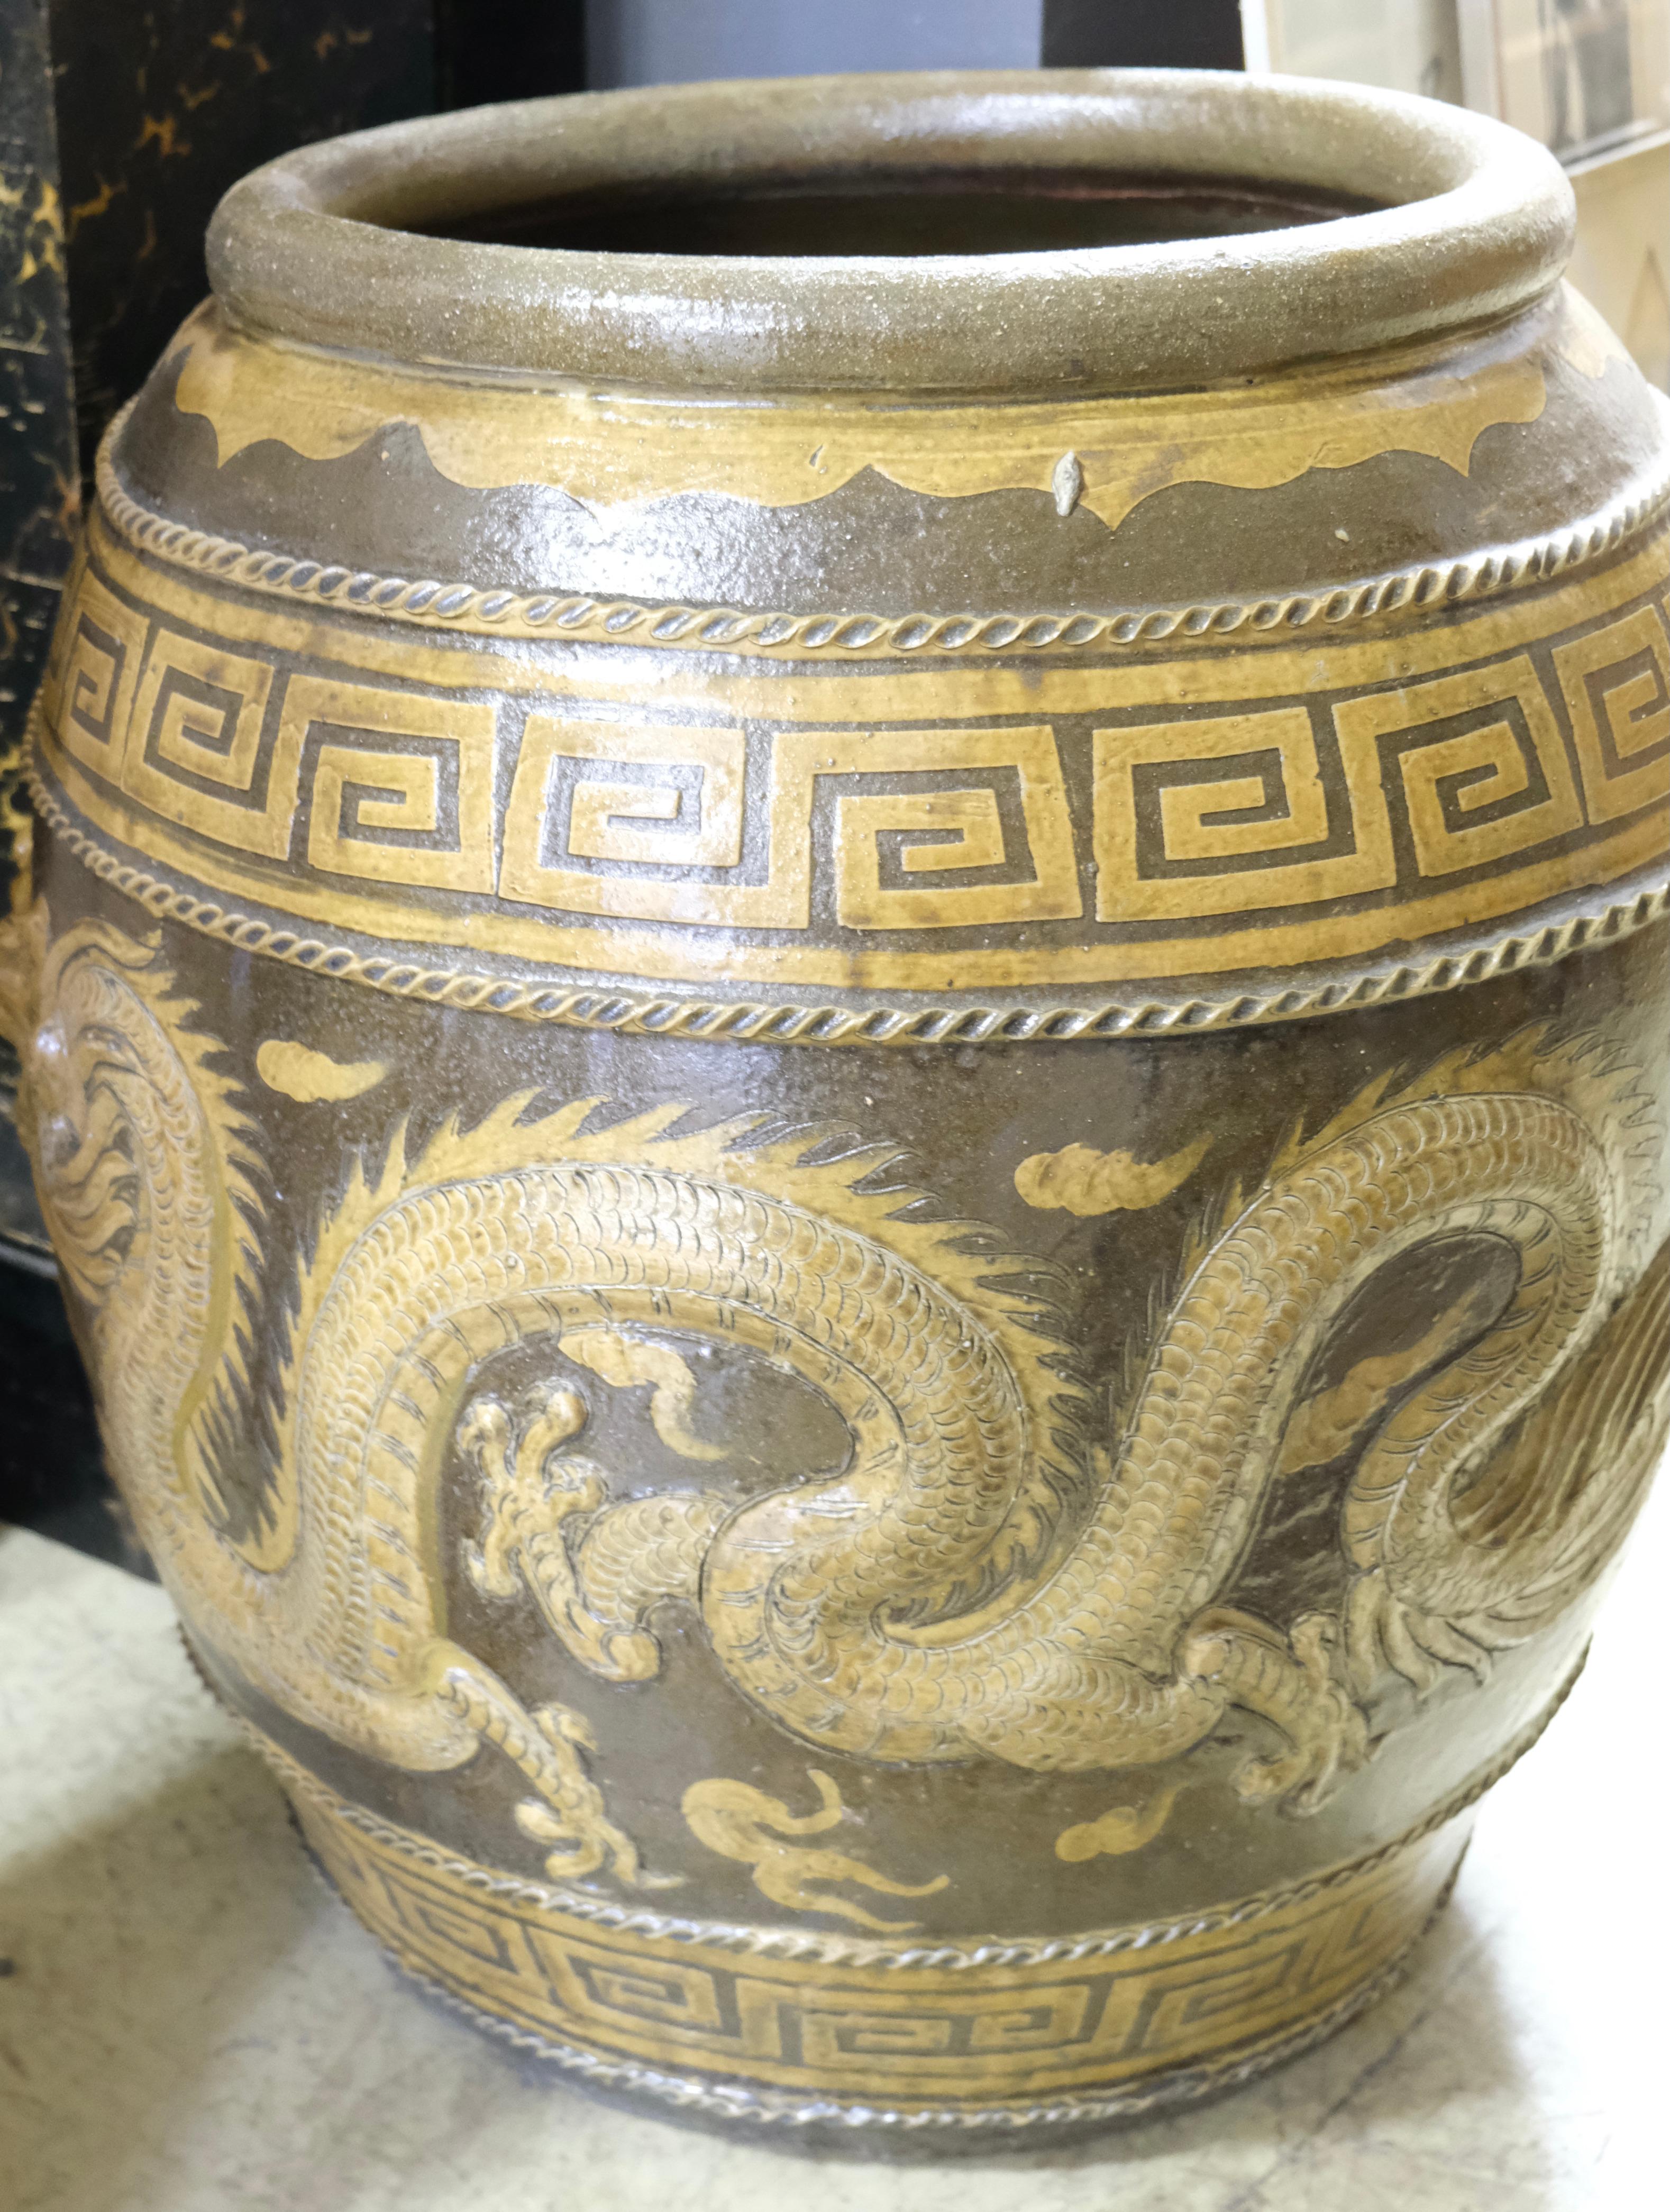 This is a wonderfully designed urn with motives of two dragons. The dragons has inlaid glass eyes and all relief is deep and gives a three dimensional look. The colors goes in beige and brown. It can be used just as a decoirative object or as a urn